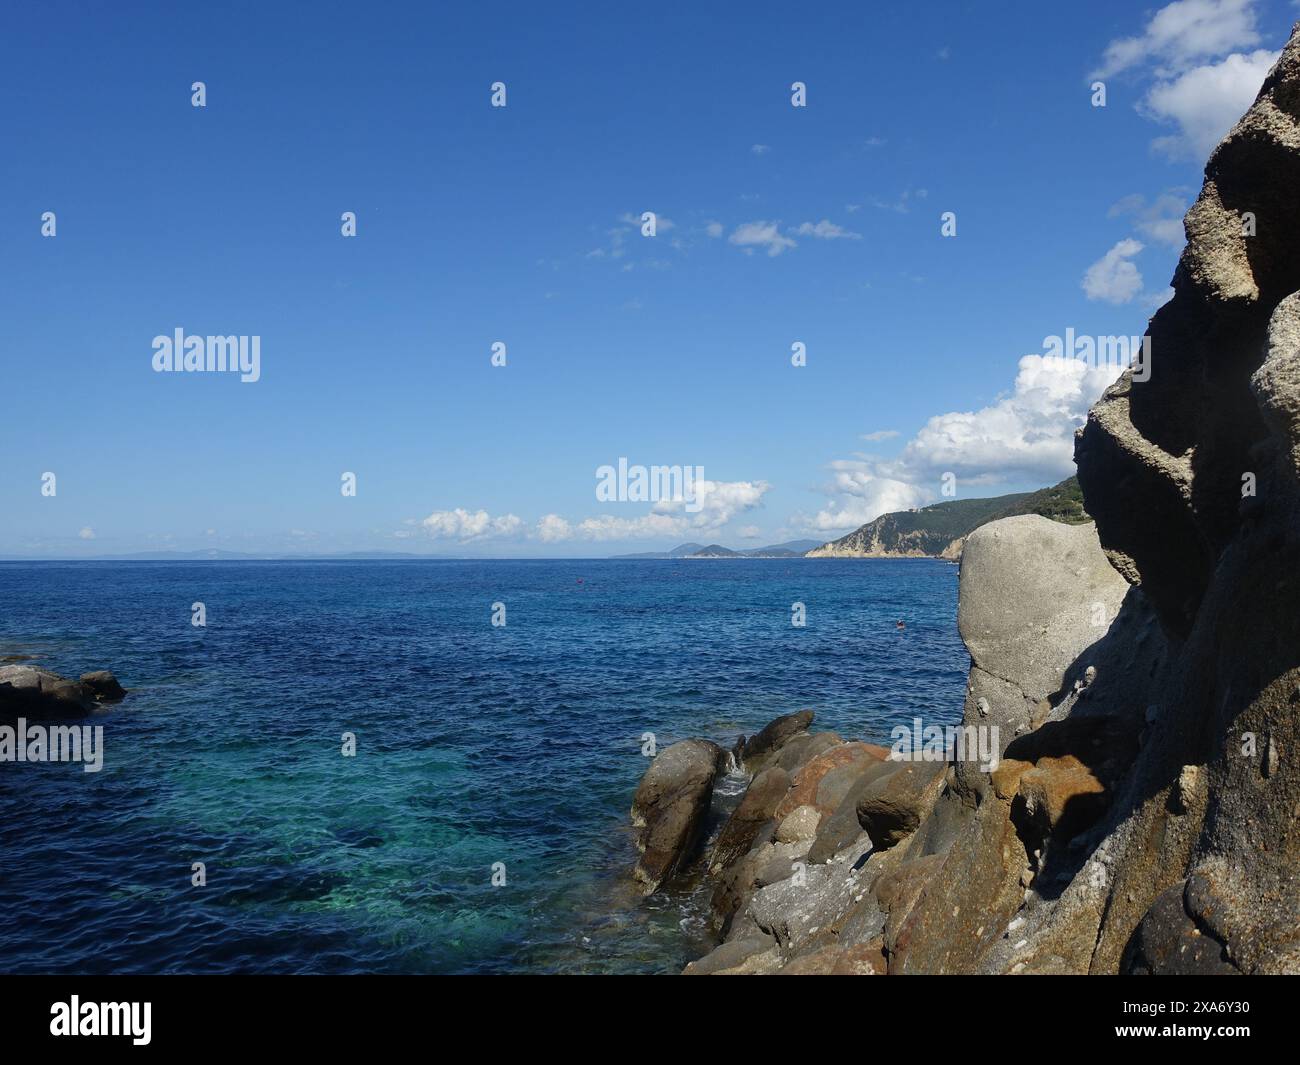 An ocean view with a rocky coastline Stock Photo